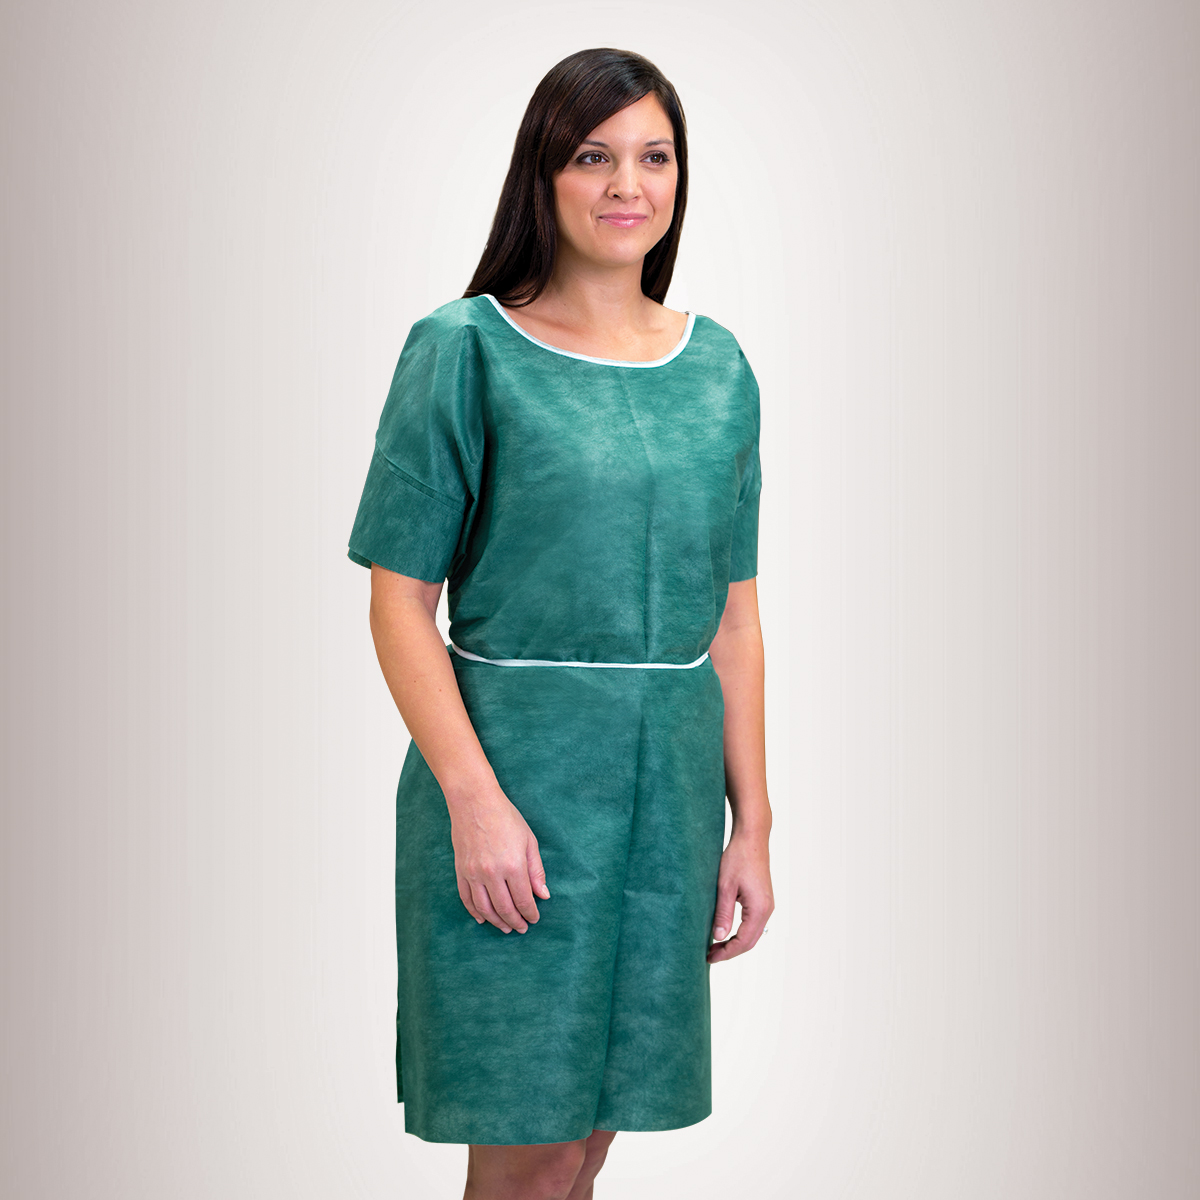 Graham Medical® Non-woven SMS Exam Gowns (Green)